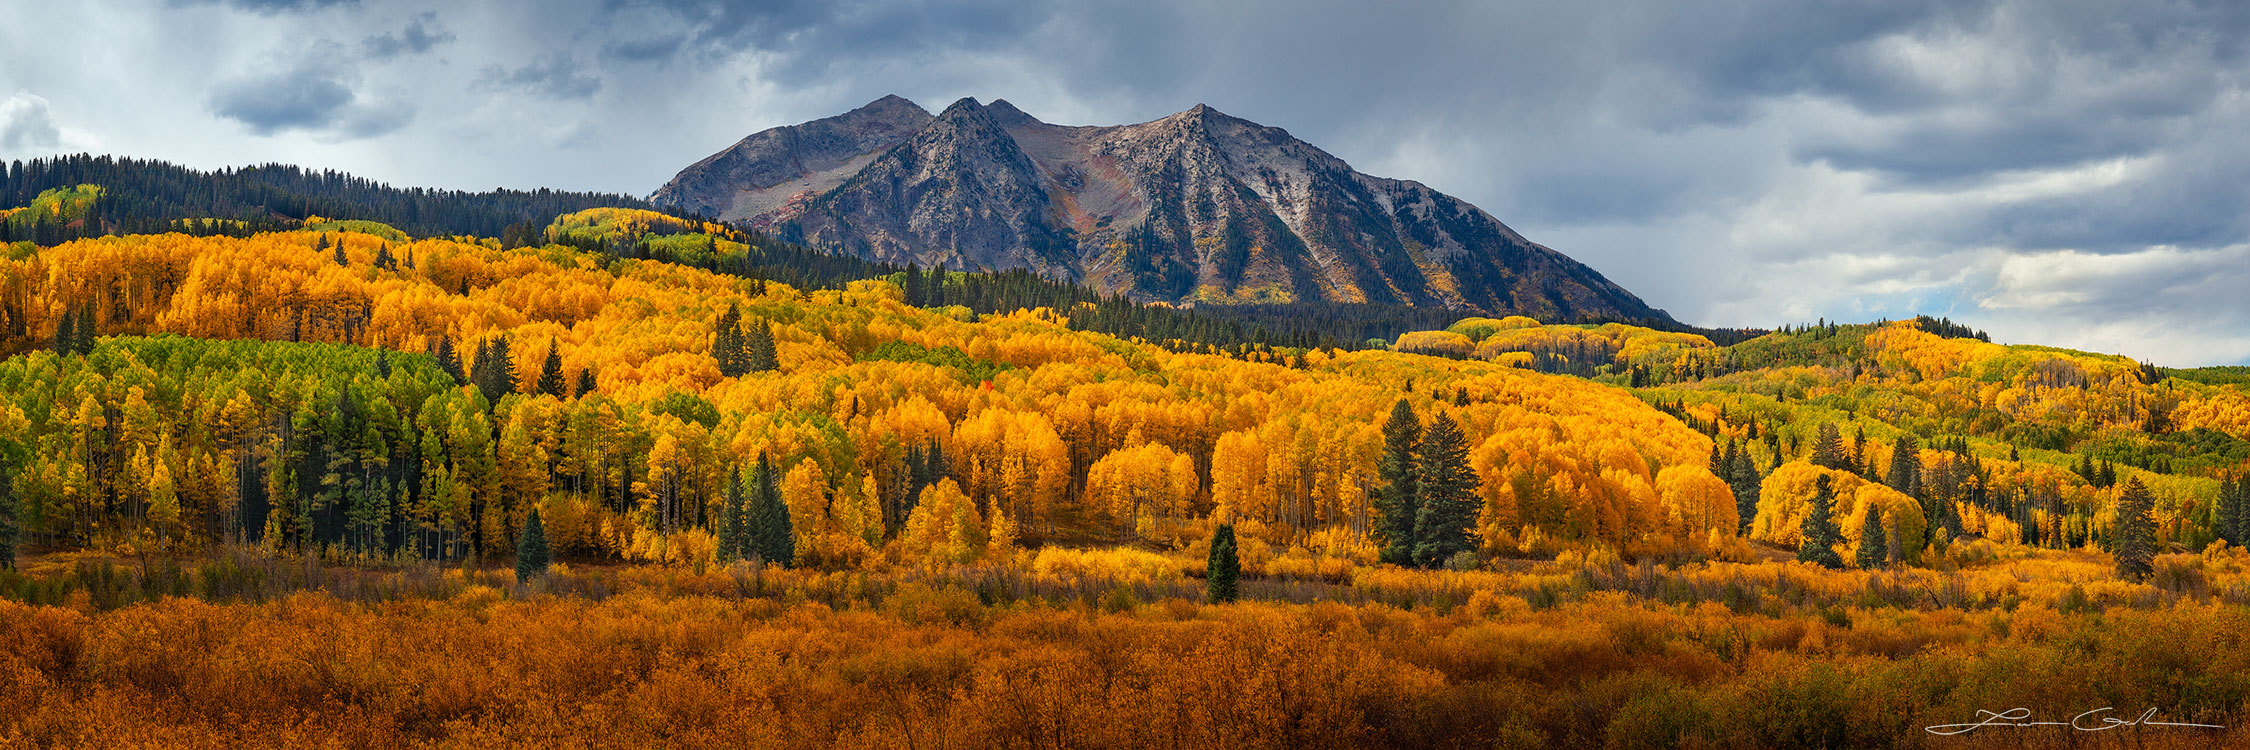 Rich fall colors in Colorado - Panoramic view of a mountain range with vibrant aspen trees displaying rich autumn foliage, capturing the beauty of fall in Colorado's rich fall colors.- Gintchin Fine Art